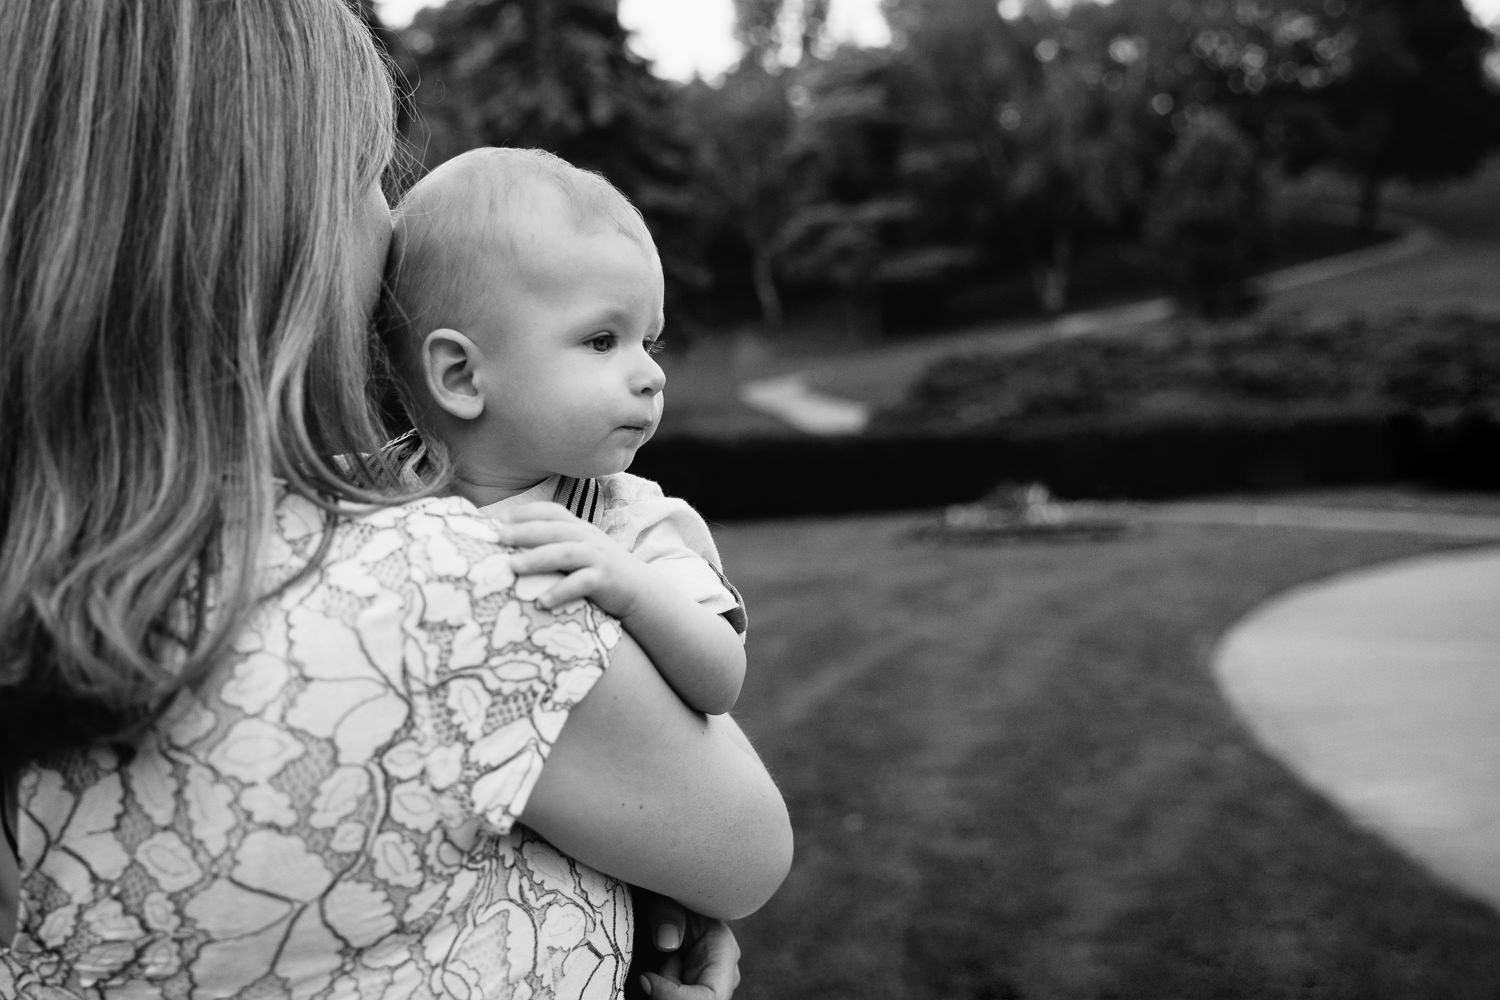 8 month old baby boy in mom's arms, hand on her shoulder looking tired off into the distance - York Region Lifestyle Photography